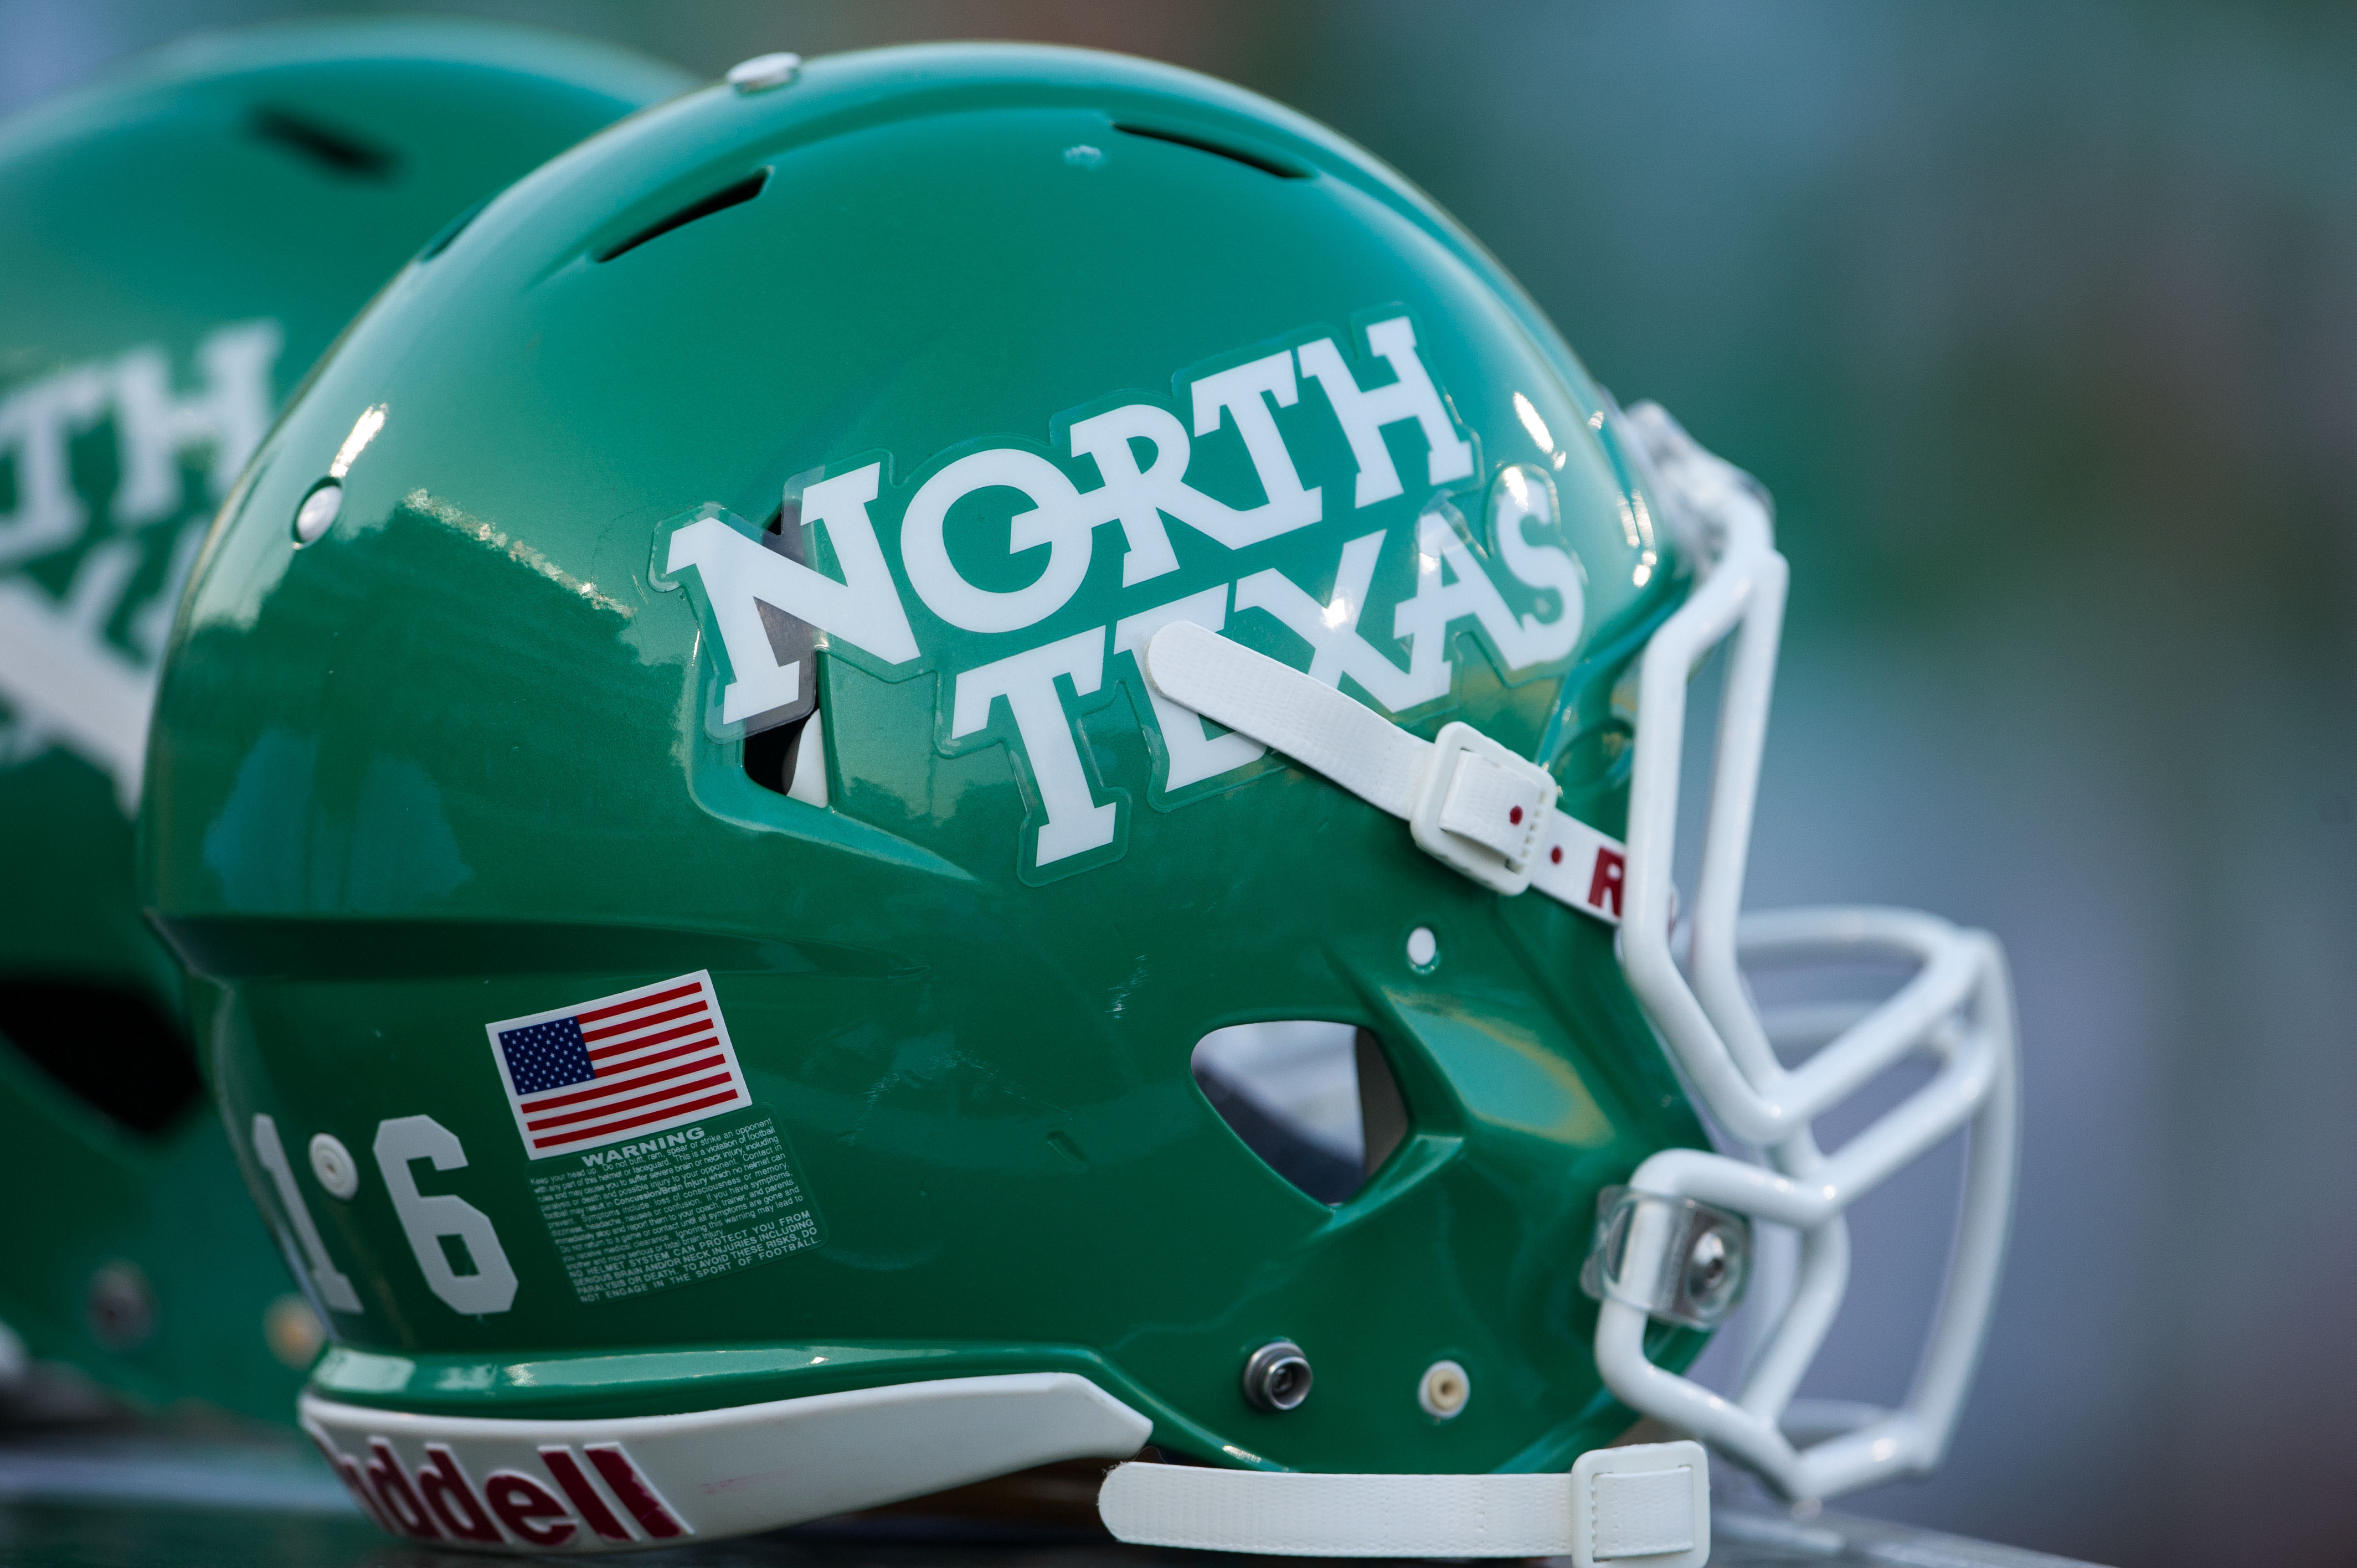 Sep 14, 2013; Denton, TX, USA; A view of a North Texas Mean Green helmet during the game between the Mean Green and the Ball State Cardinals at Apogee Stadium. The Mean Green defeated the Cardinals 34-27. Mandatory Credit: Jerome Miron-USA TODAY Sports